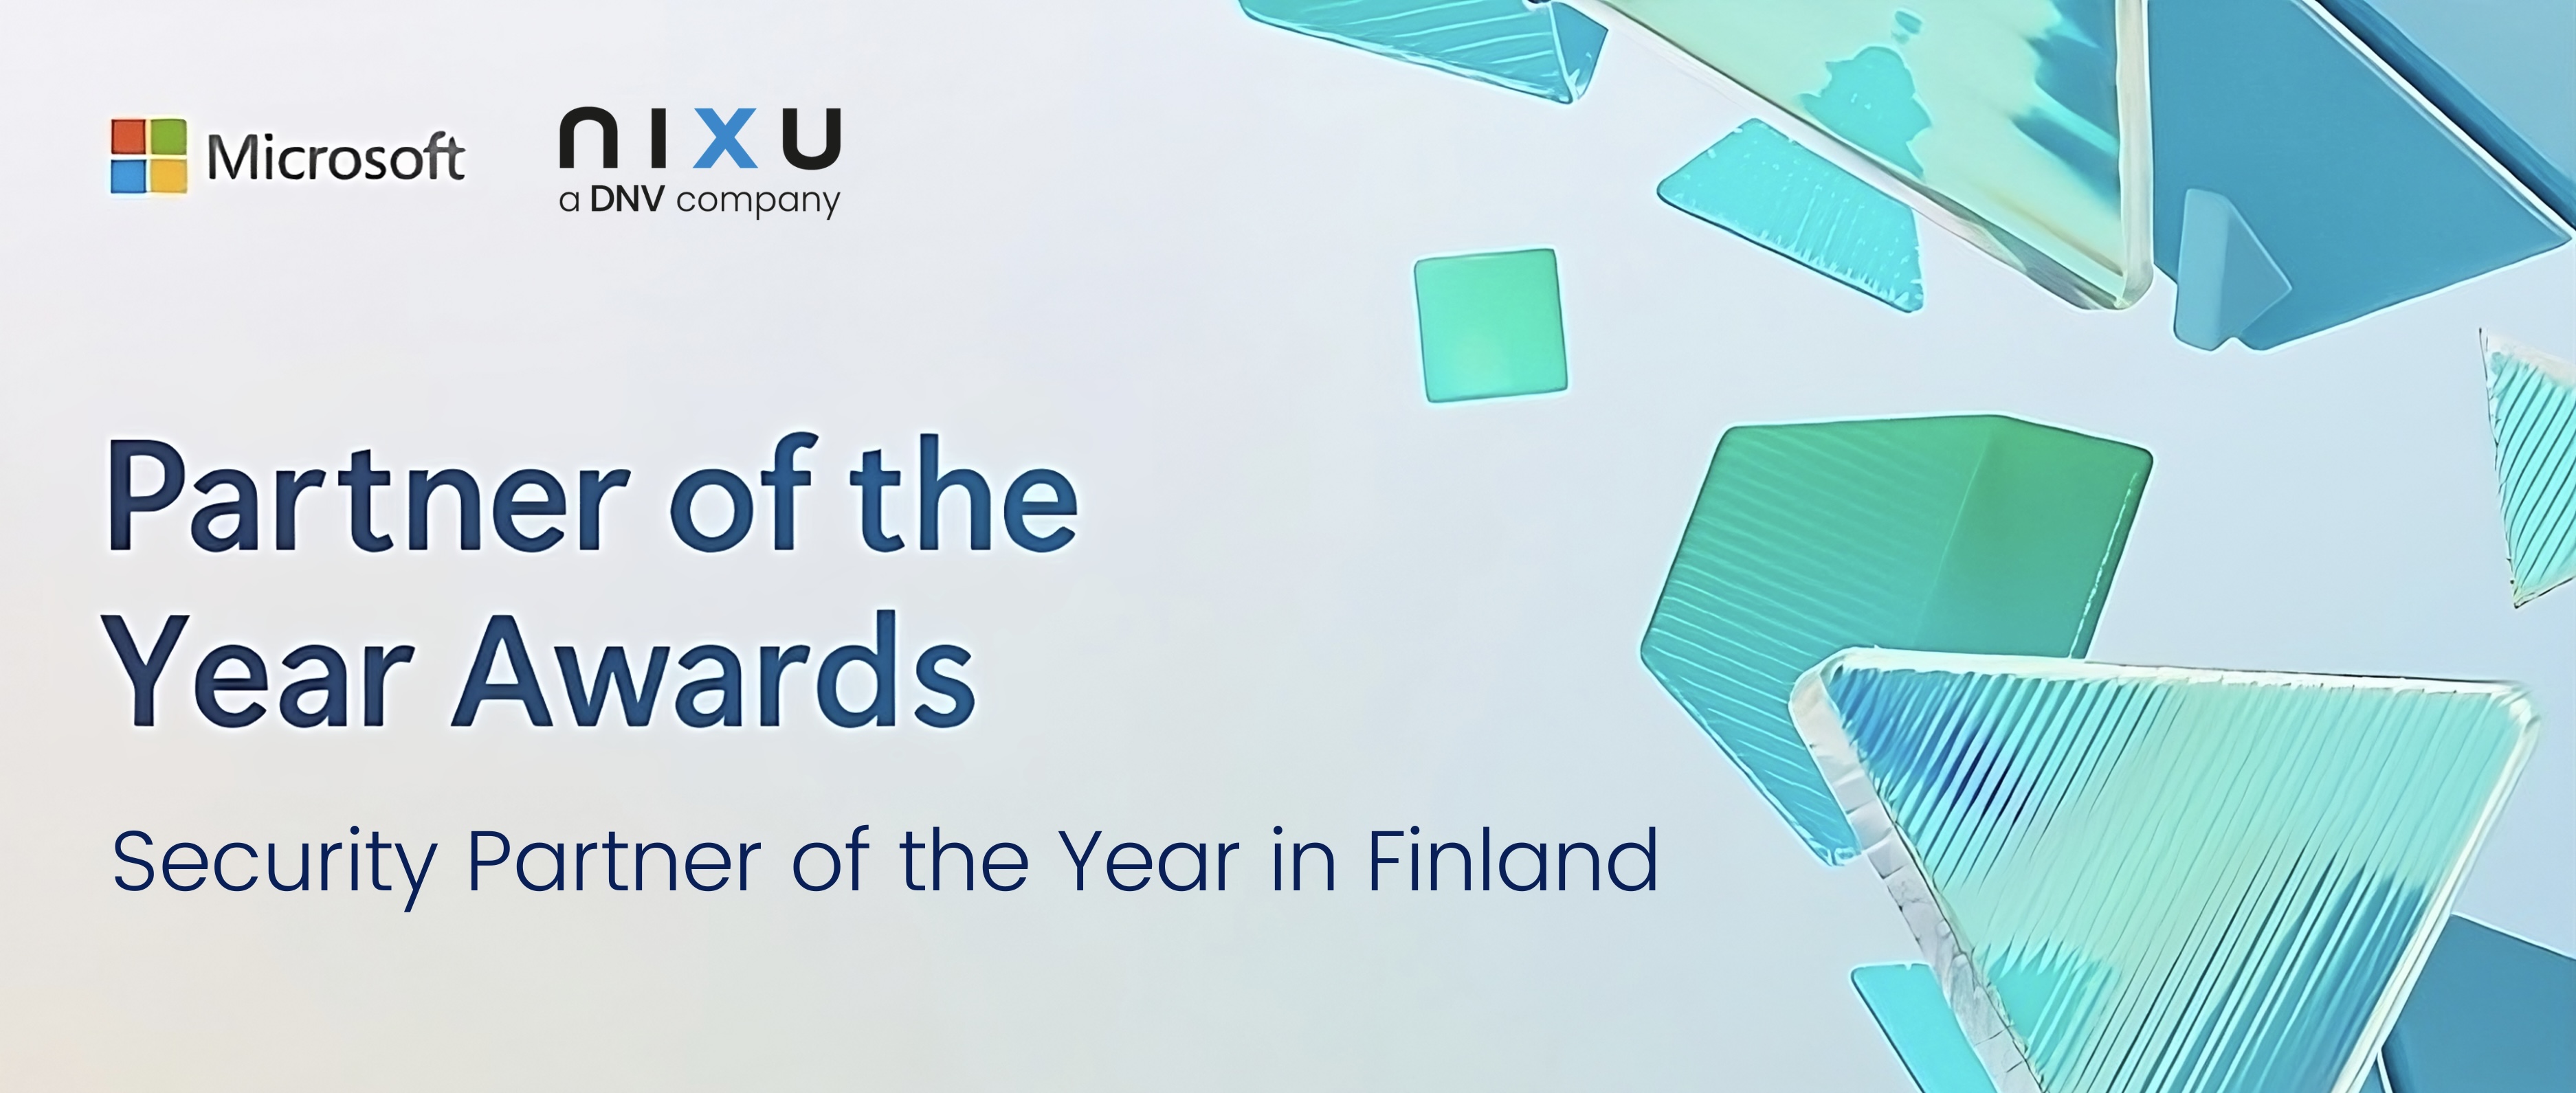 Nixu is Microsoft's Security Partner of the Year in Finland 